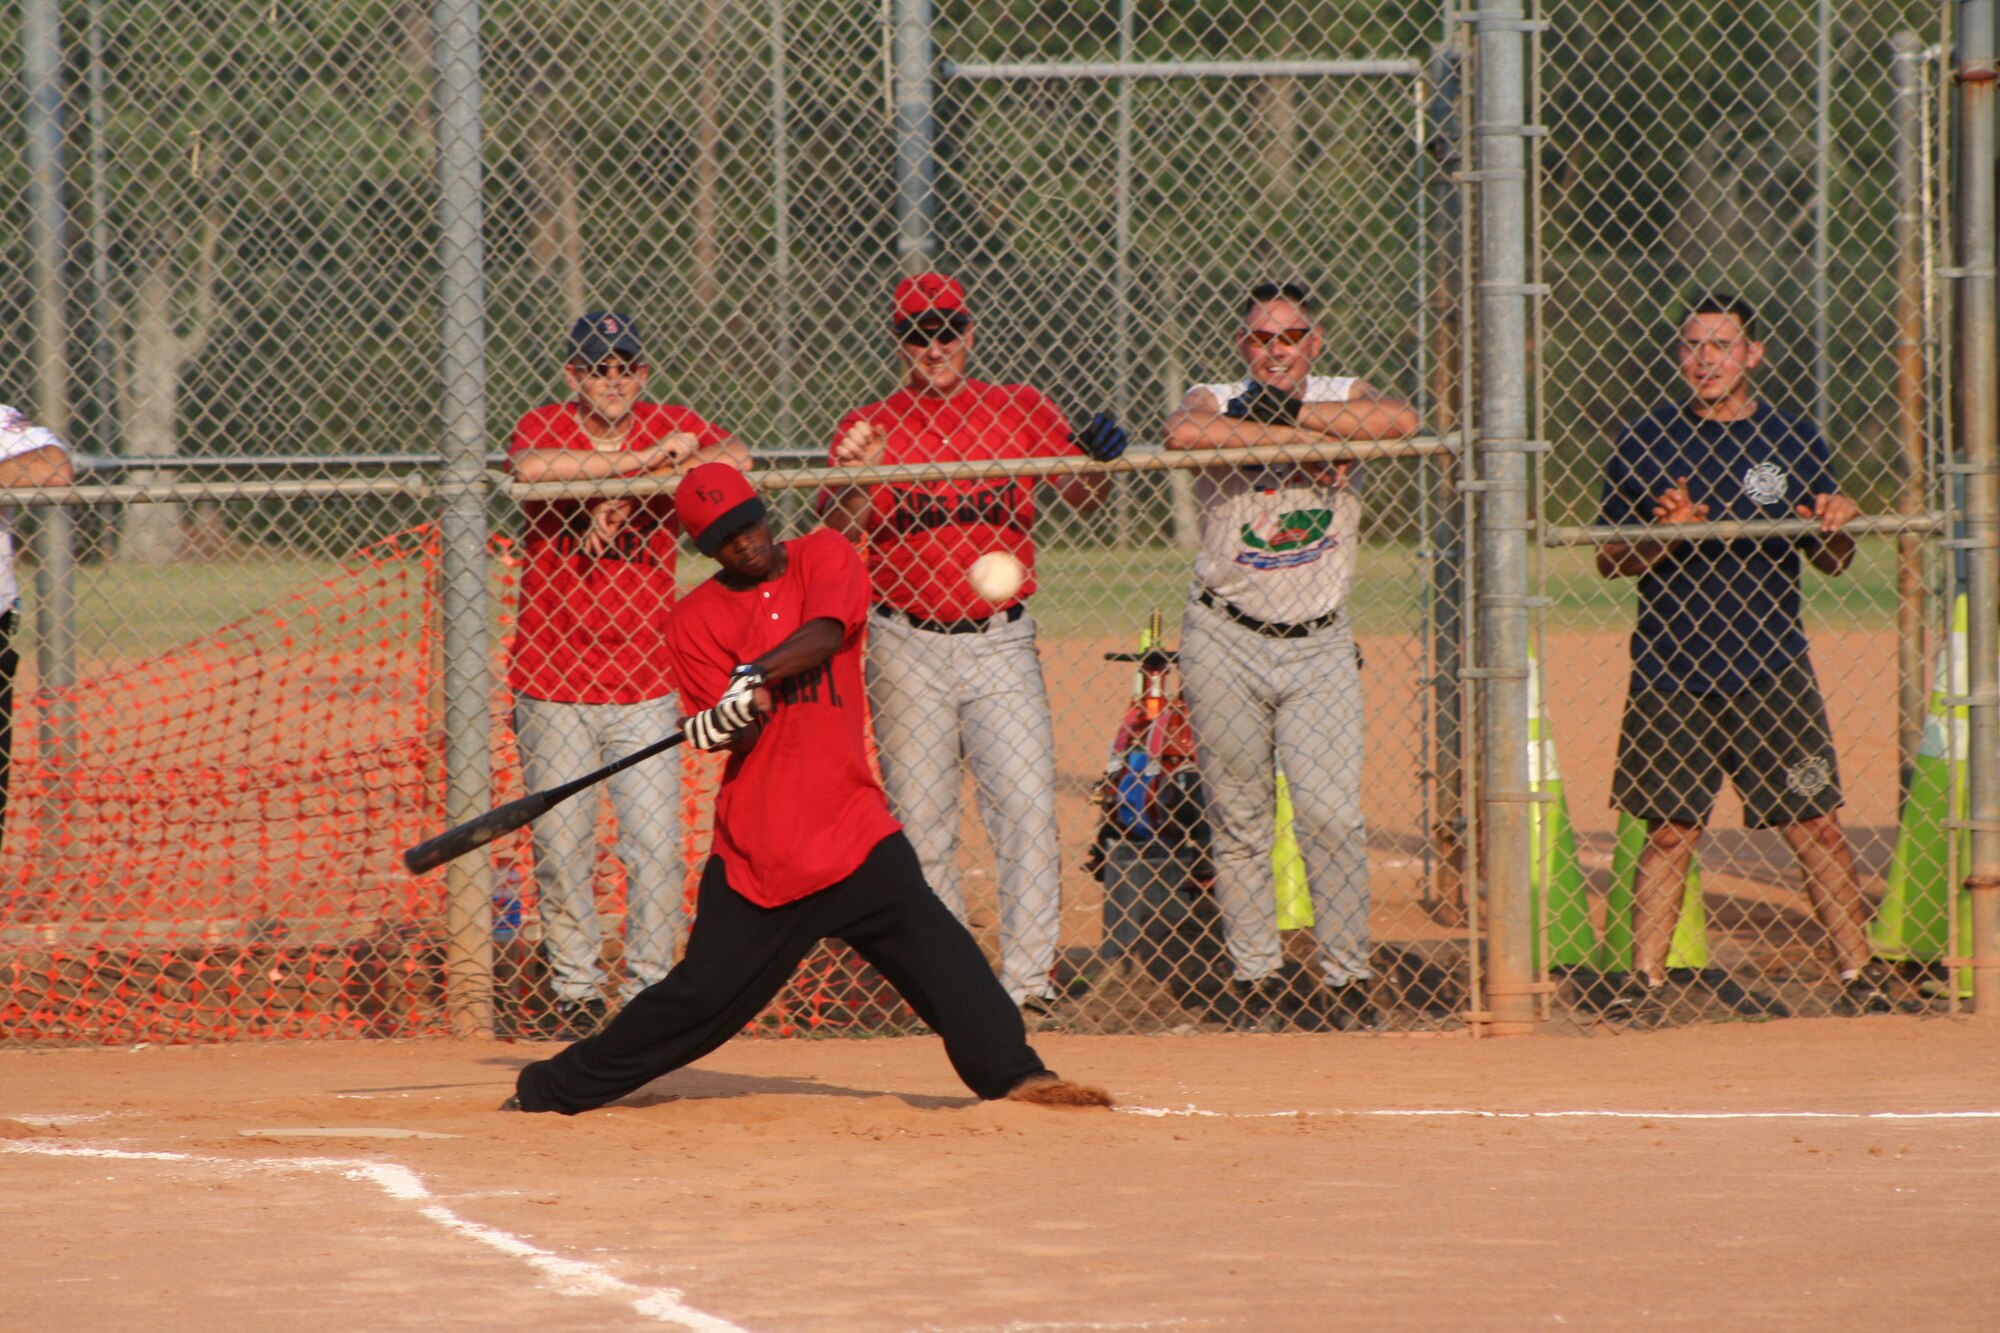 Elliot Lewis, 16th CES, prepares for a base hit during the fifth inning against CONS/STS.